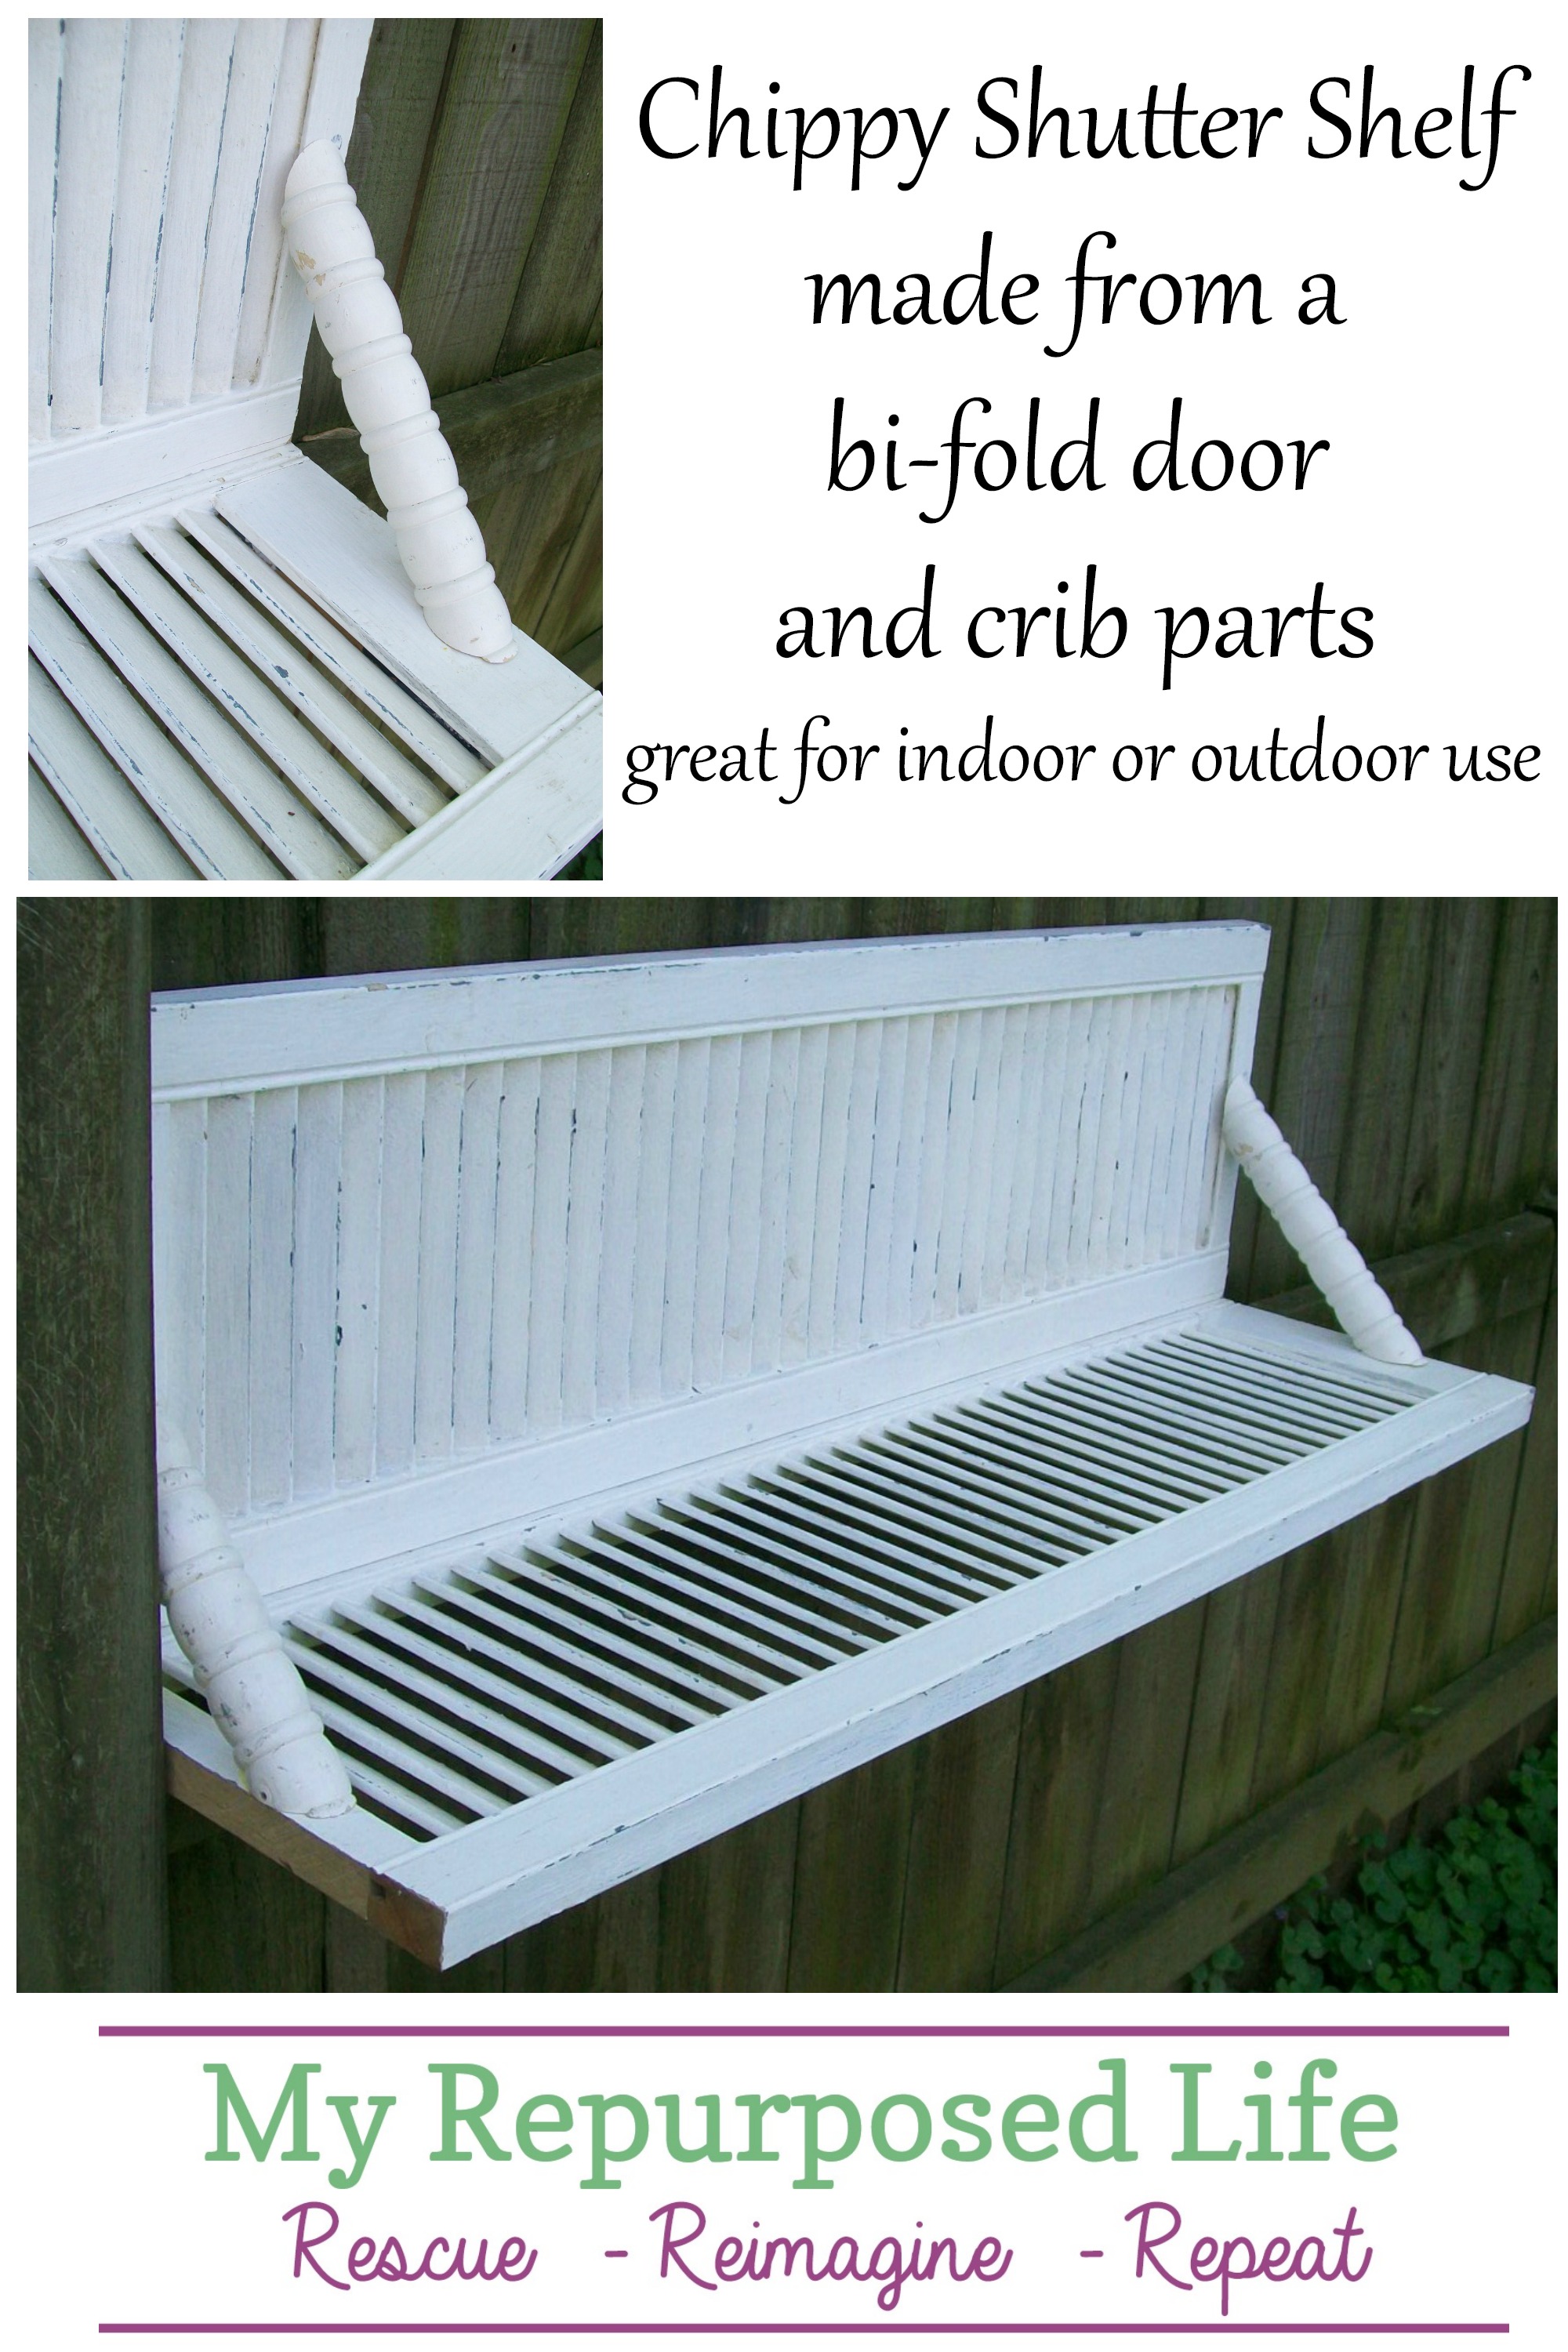 How to make the easiest chippy shutter shelf ever! Shutters can be hard to find and expensive. No problem! Use a bi-fold door instead of shutters. Easy! #MyRepurposedLife #repurposed #shutter #shelf #upcycle #indoors #outdoors #project via @repurposedlife